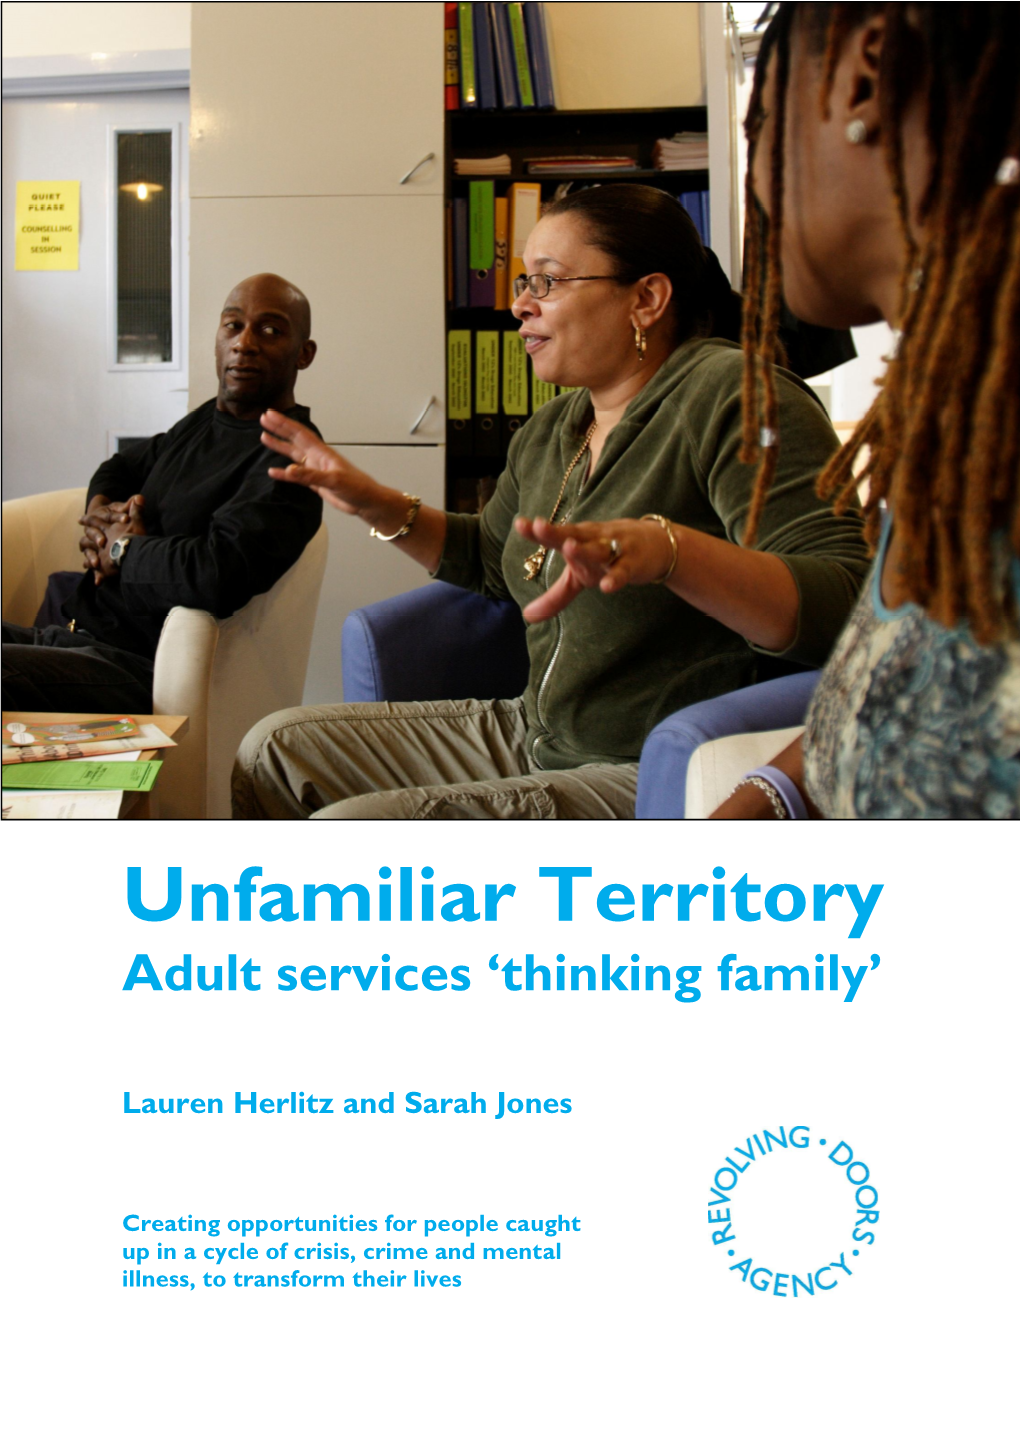 Unfamiliar Territory Adult Services ‘Thinking Family’